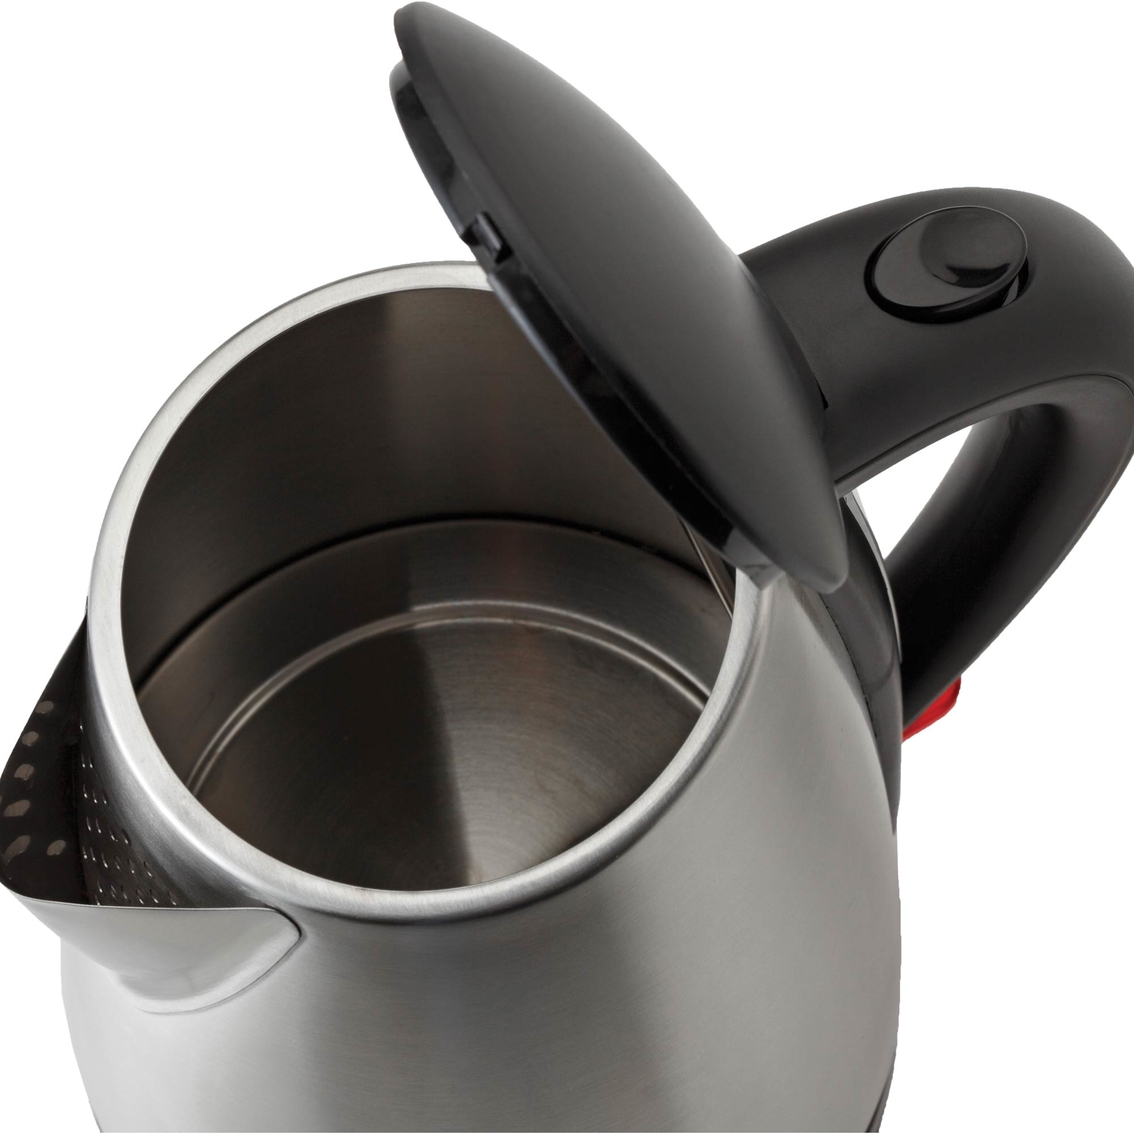 Aroma Stainless Steel Electric Water Kettle - Image 2 of 4